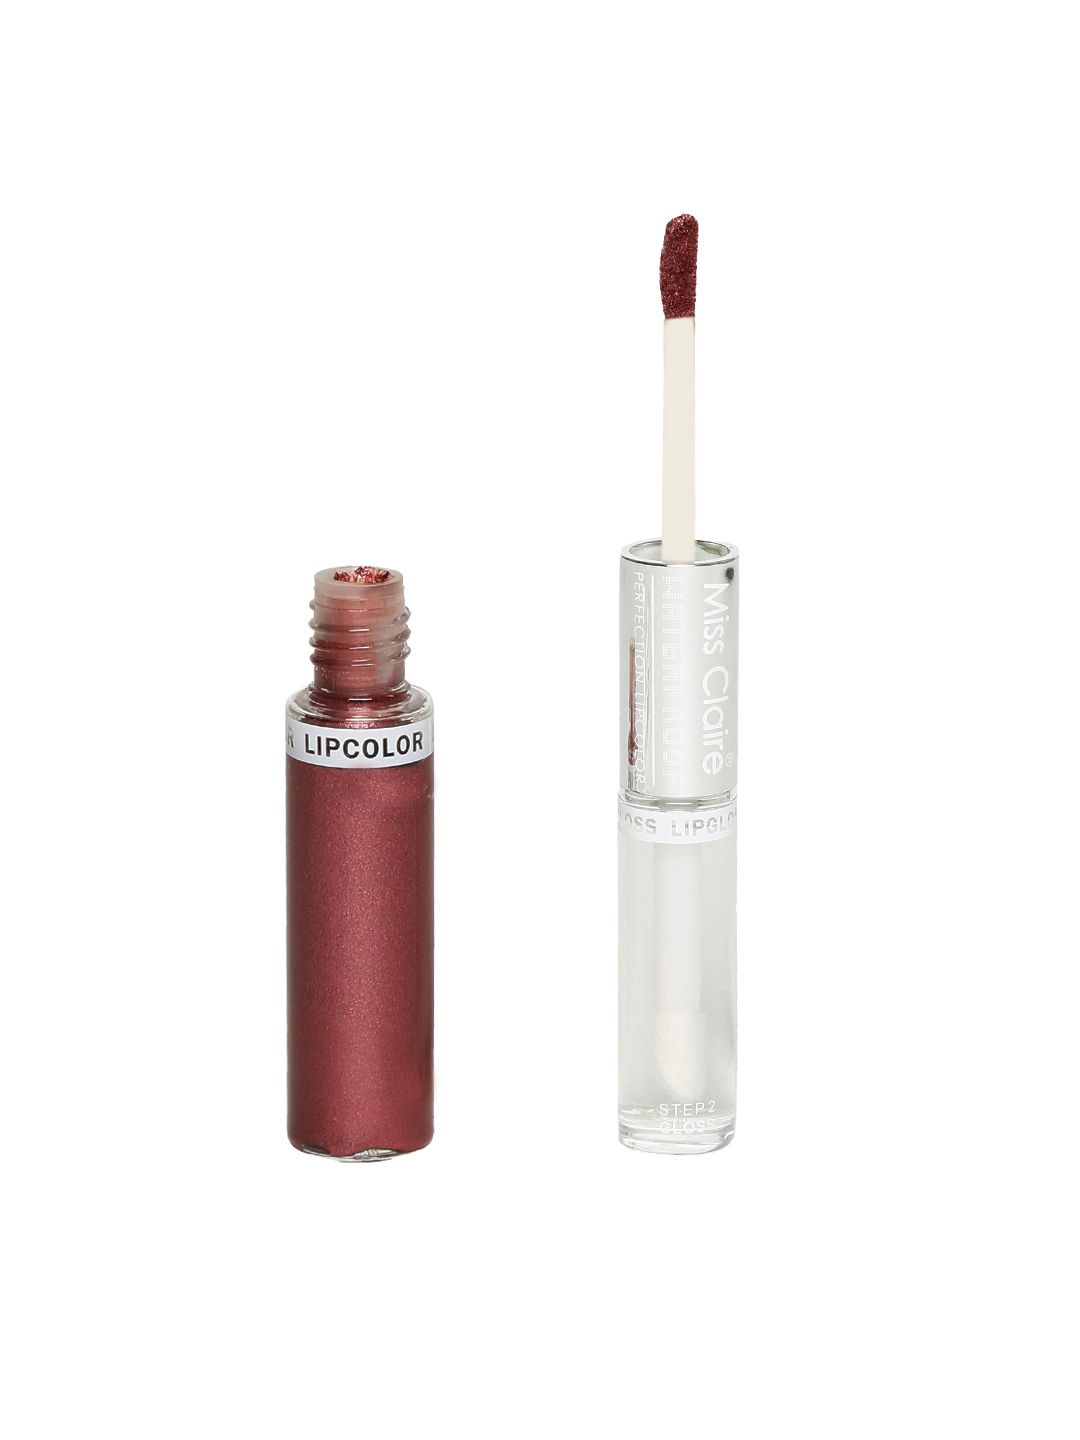 Miss Claire 36 Waterproof Perfection Lip Color & Lip Gloss 10 ml Price in India